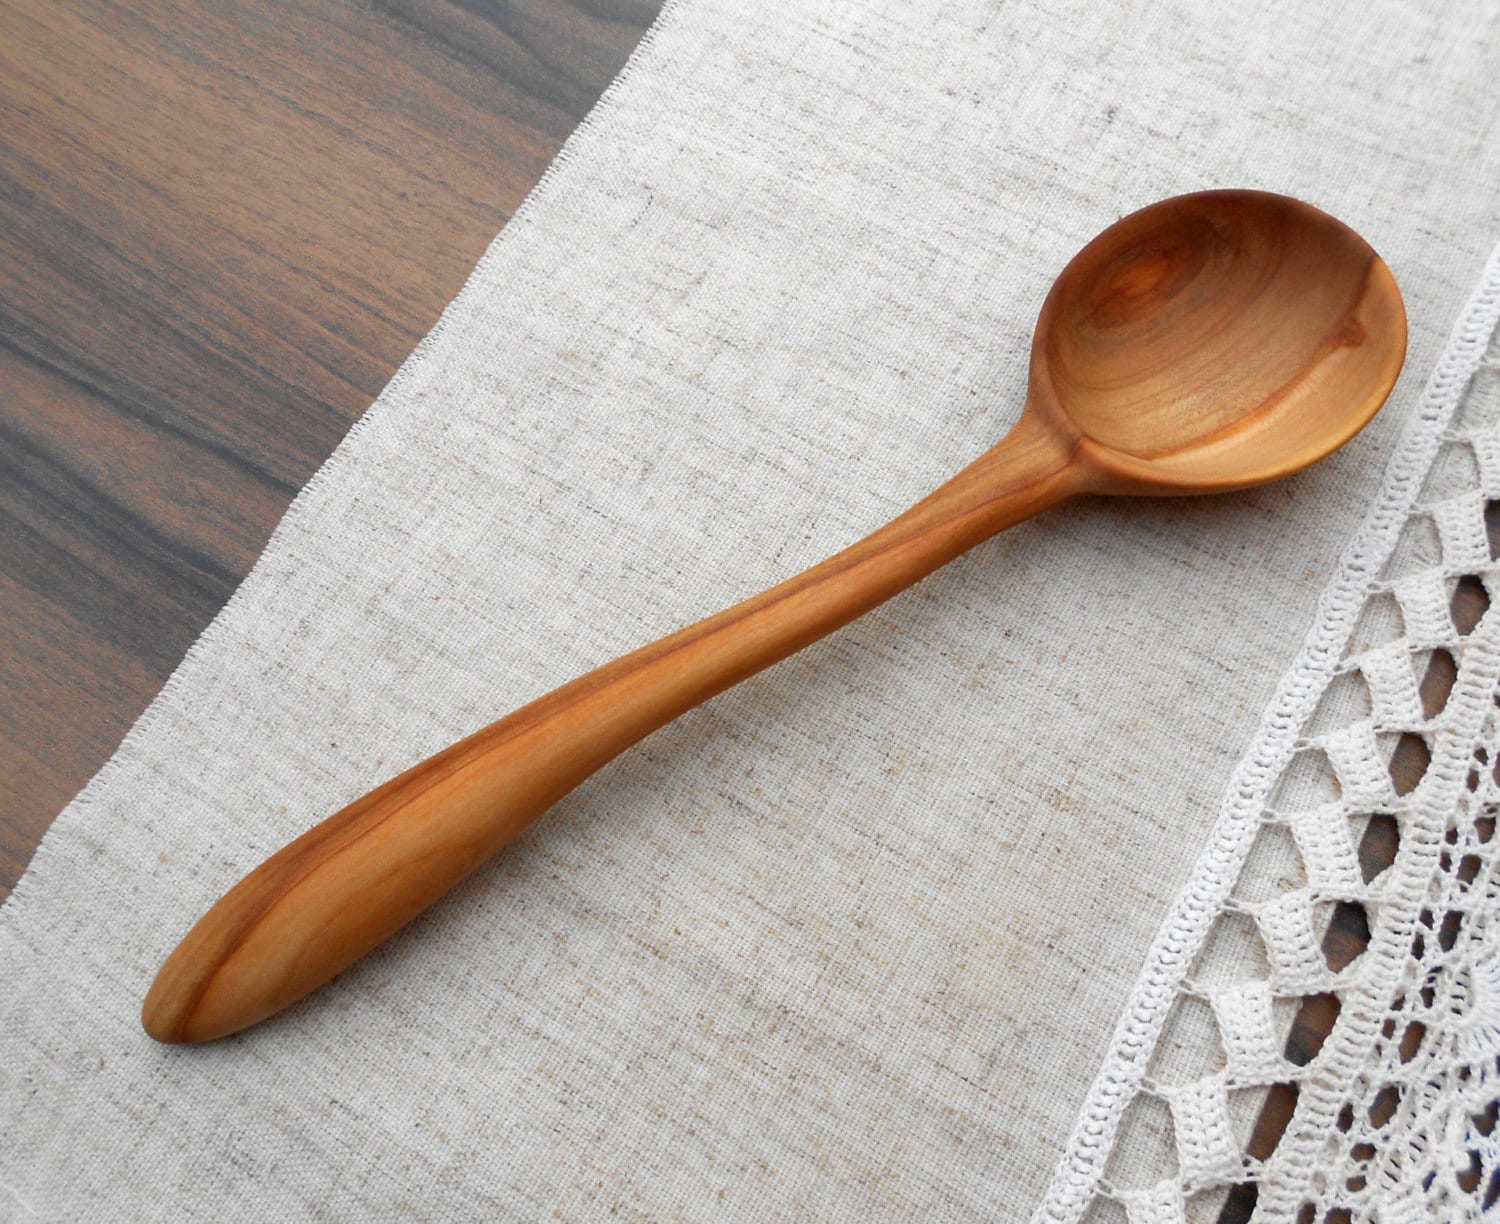 Cooking kitchen wooden spoon in cherrywooden by ...